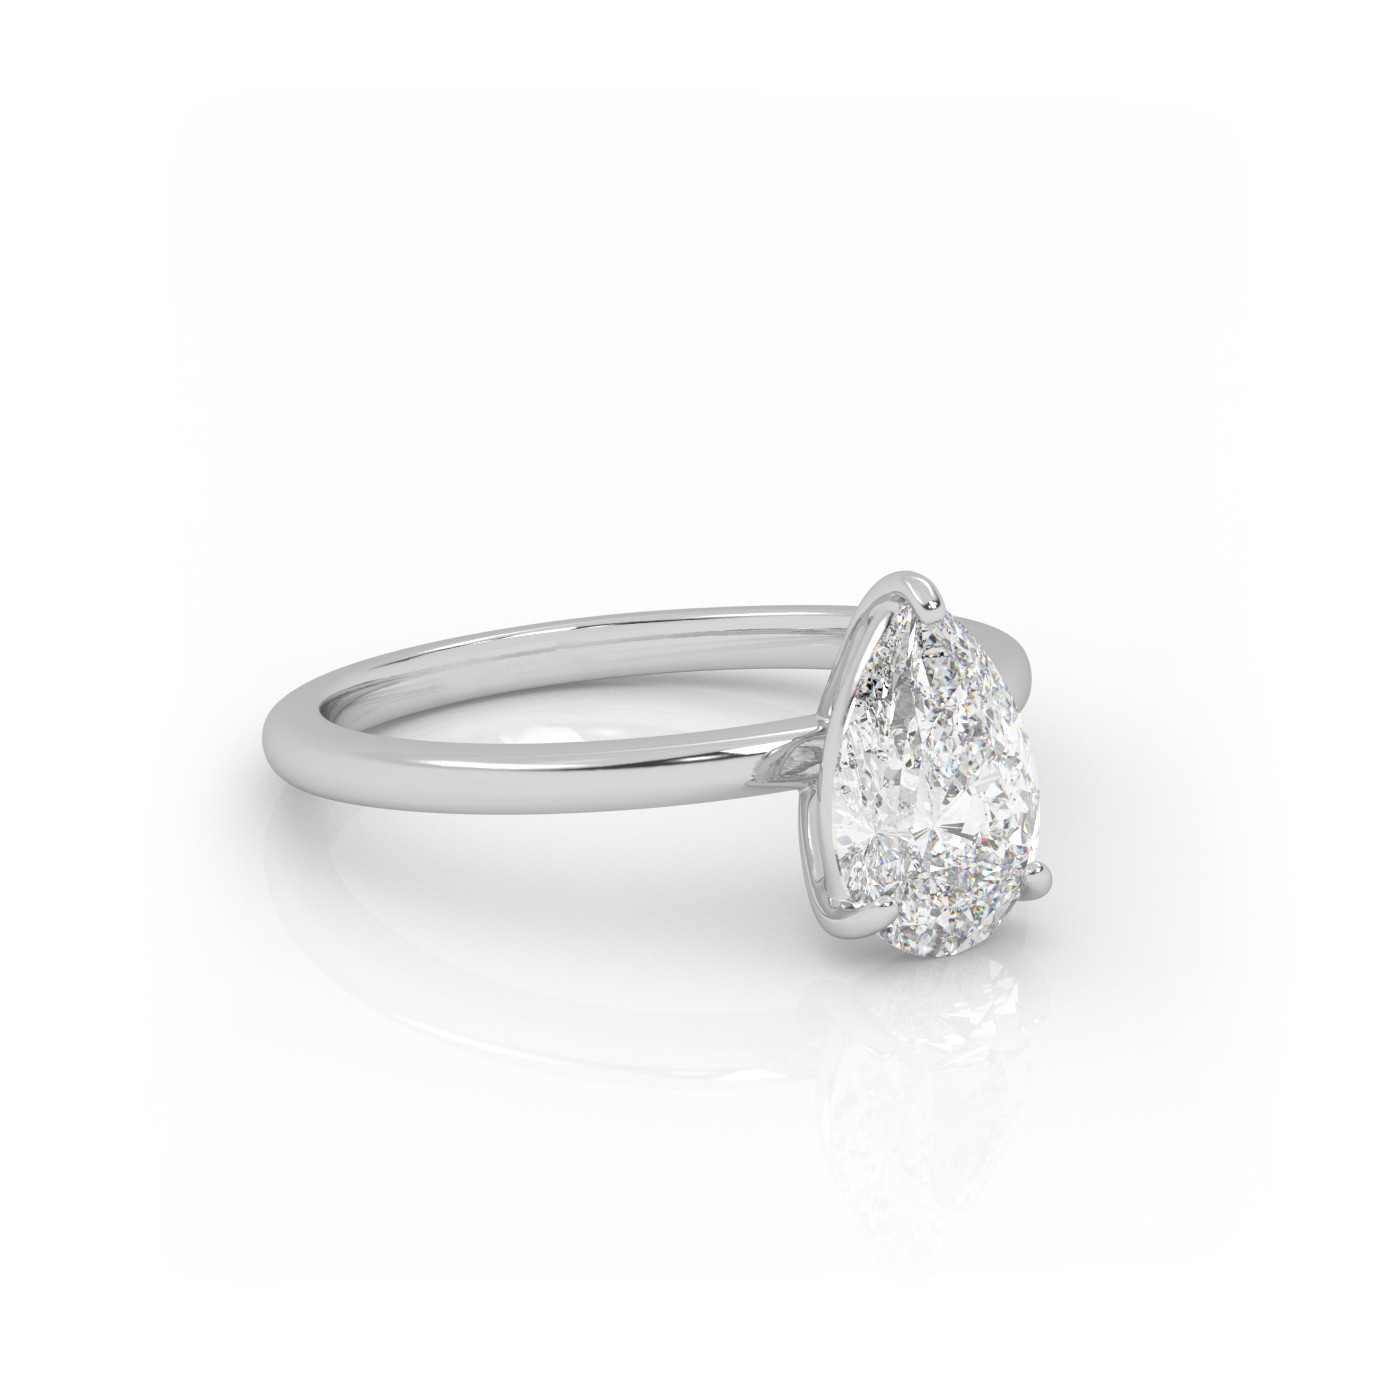 18K WHITE GOLD Pear Diamond Cut Solitaire Engagement Ring